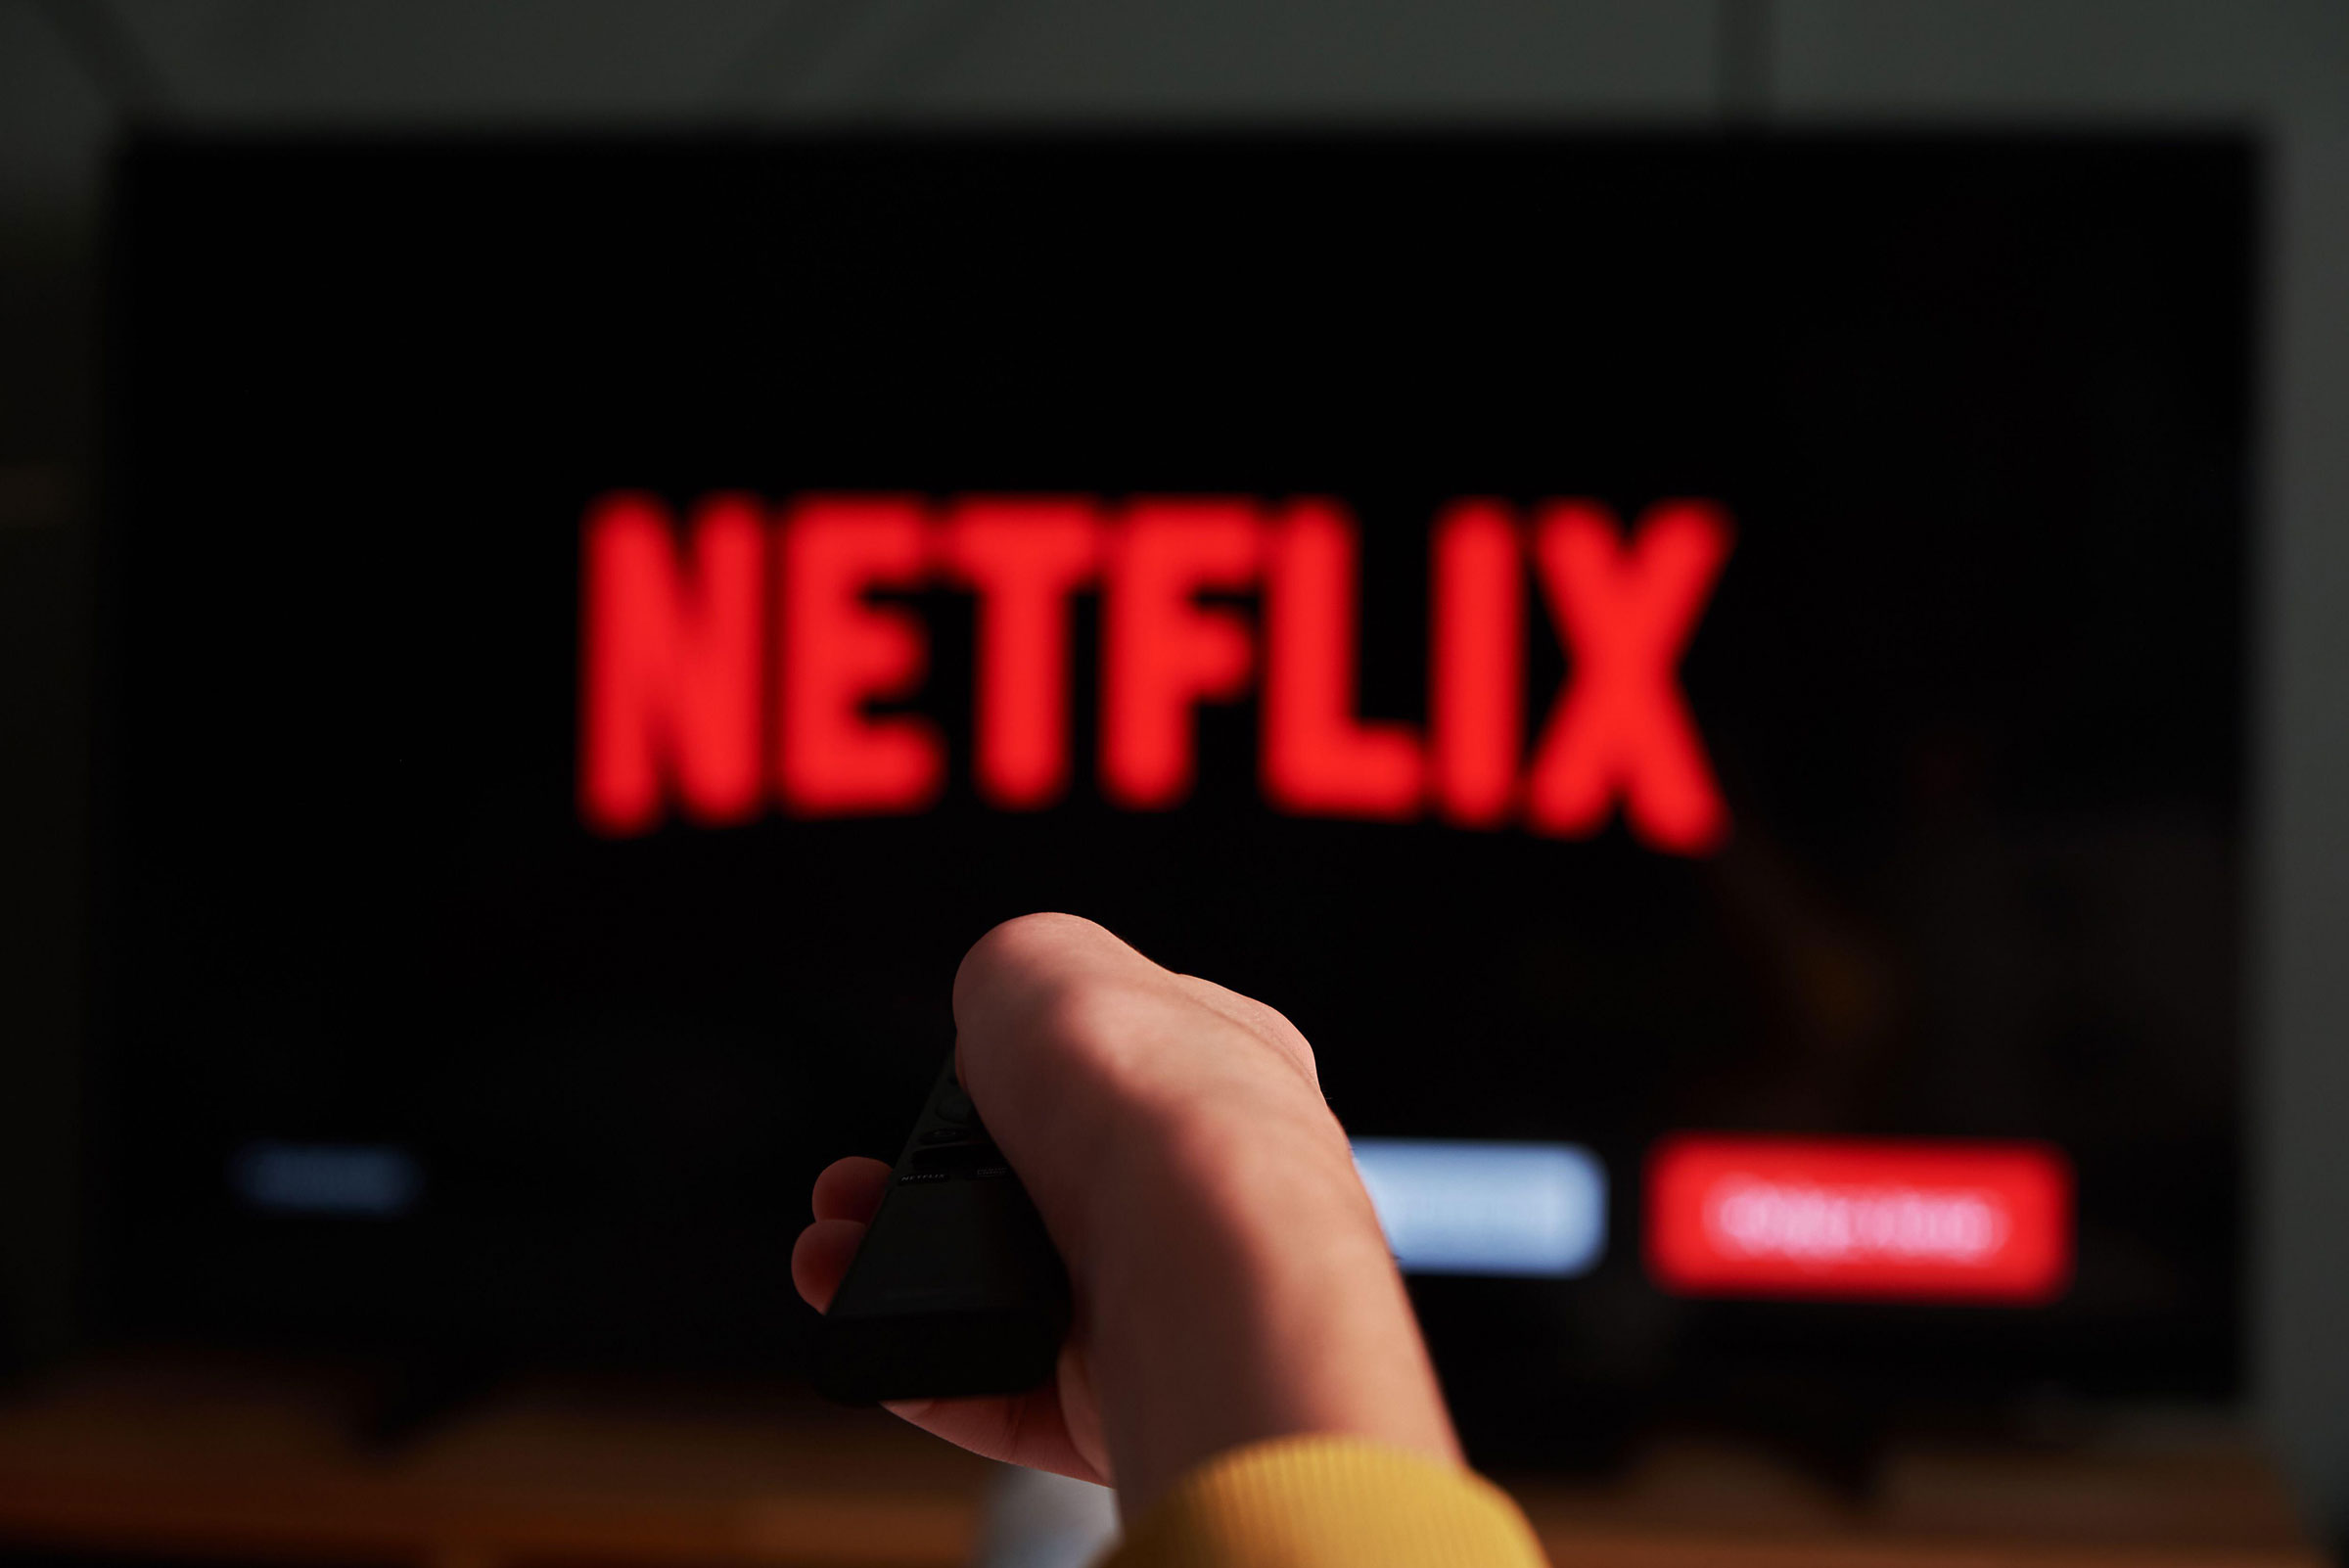 6 best Netflix shows to watch and which 3 shows to skip in June 2022